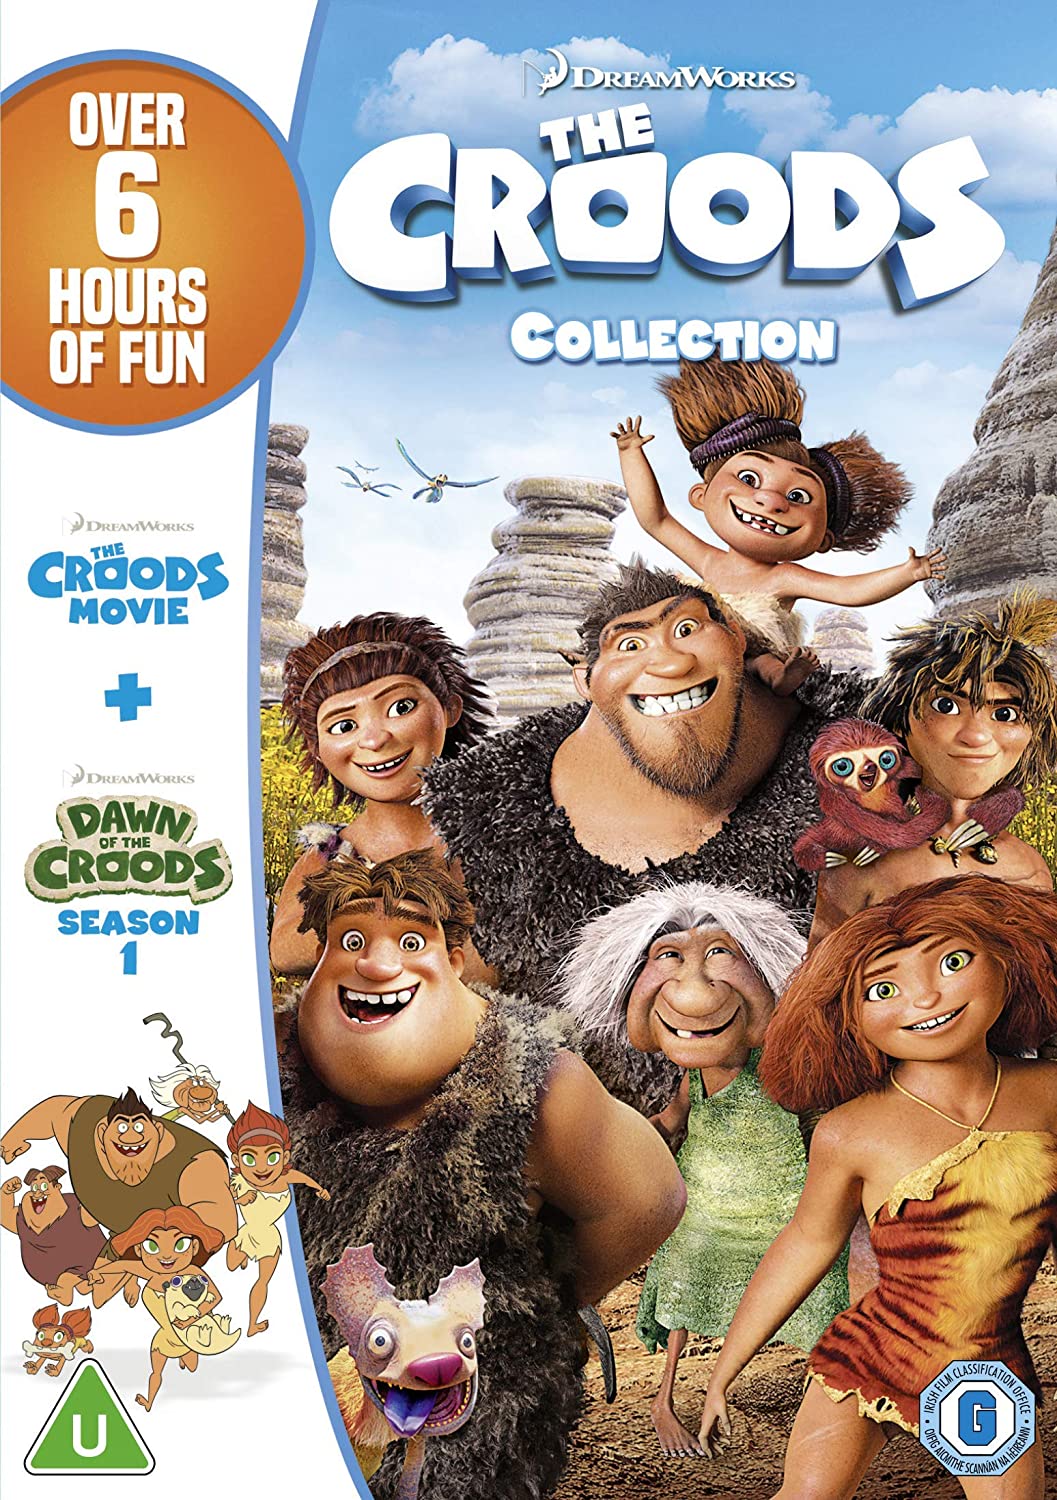 The Croods [Ultimate Collection Includes Season 1] (Dreamworks) (DVD)